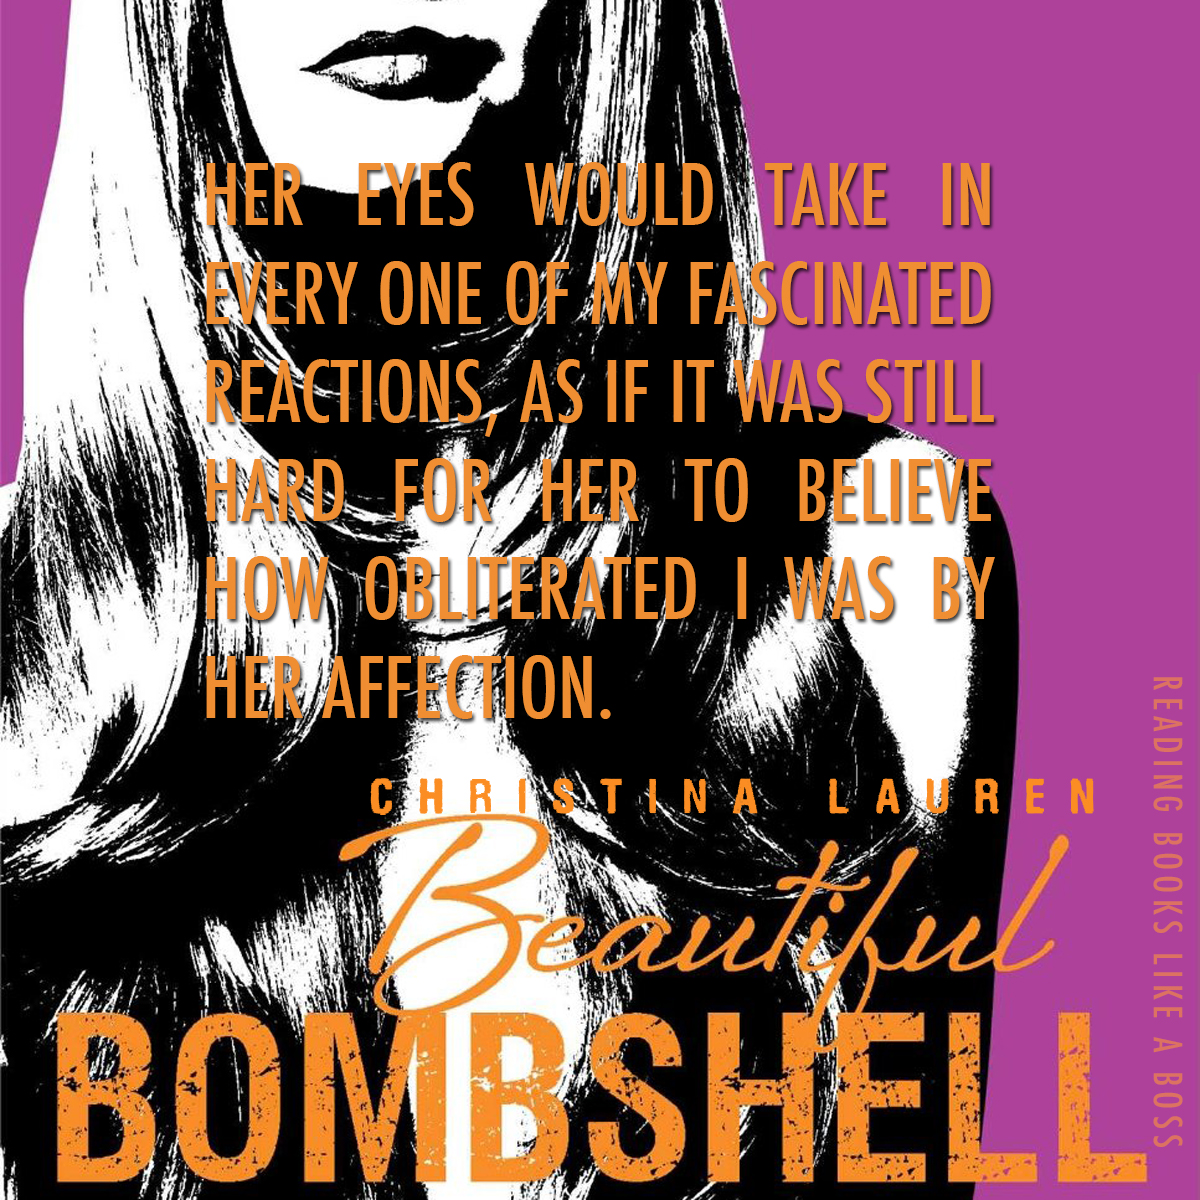 Review - Beautiful Bombshell by Christina Lauren